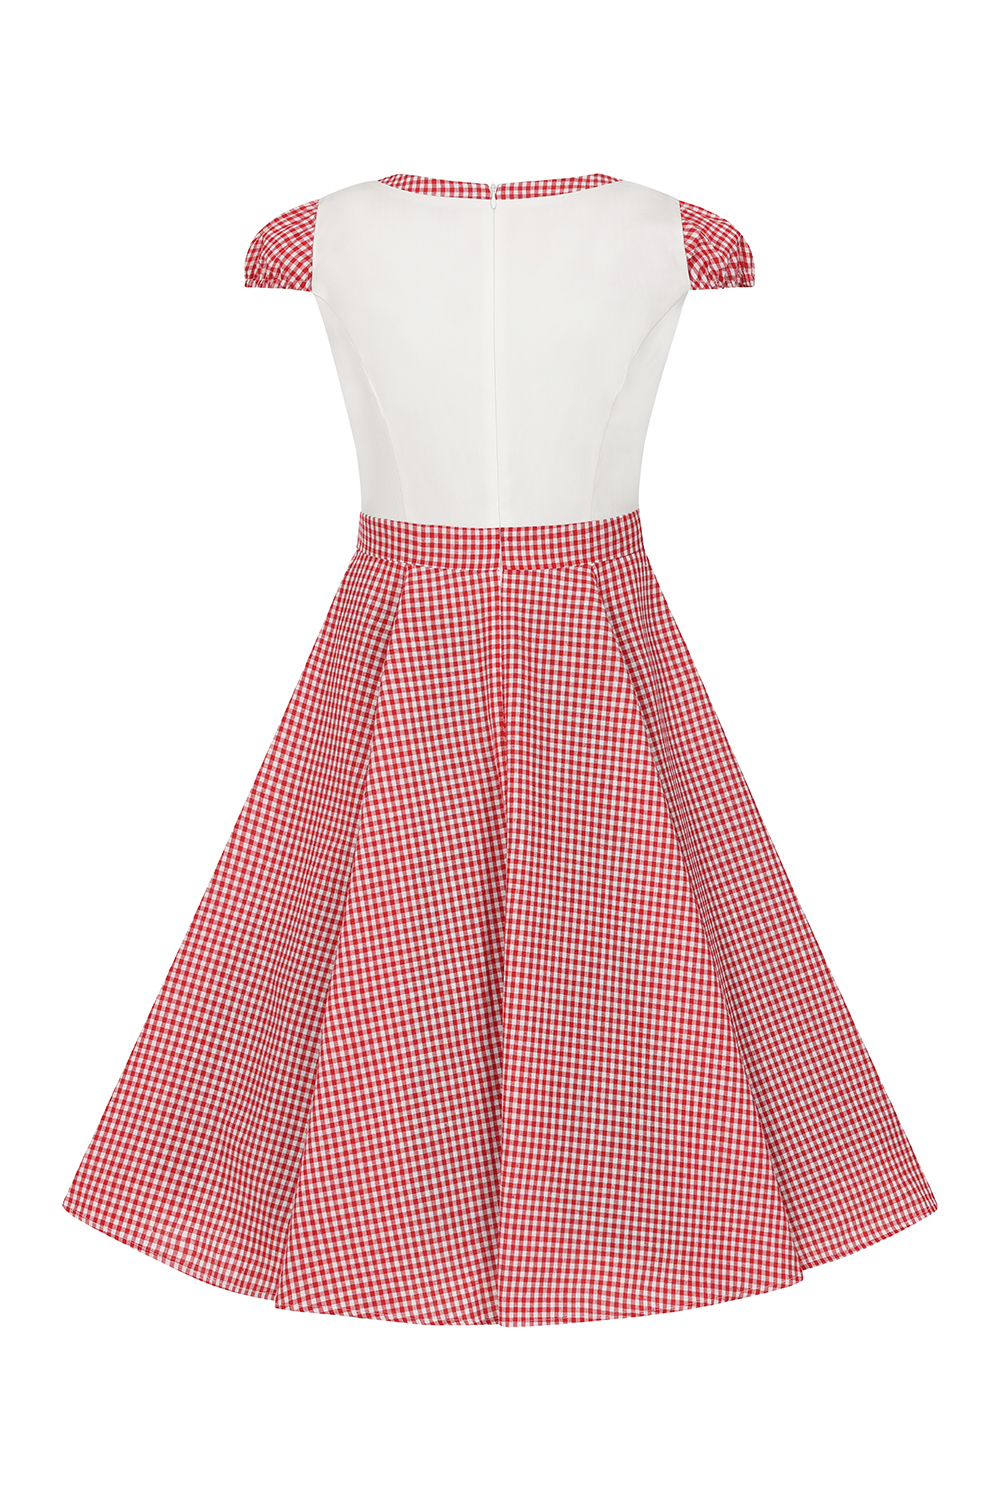 Chelsea Check Swing Dress in Red